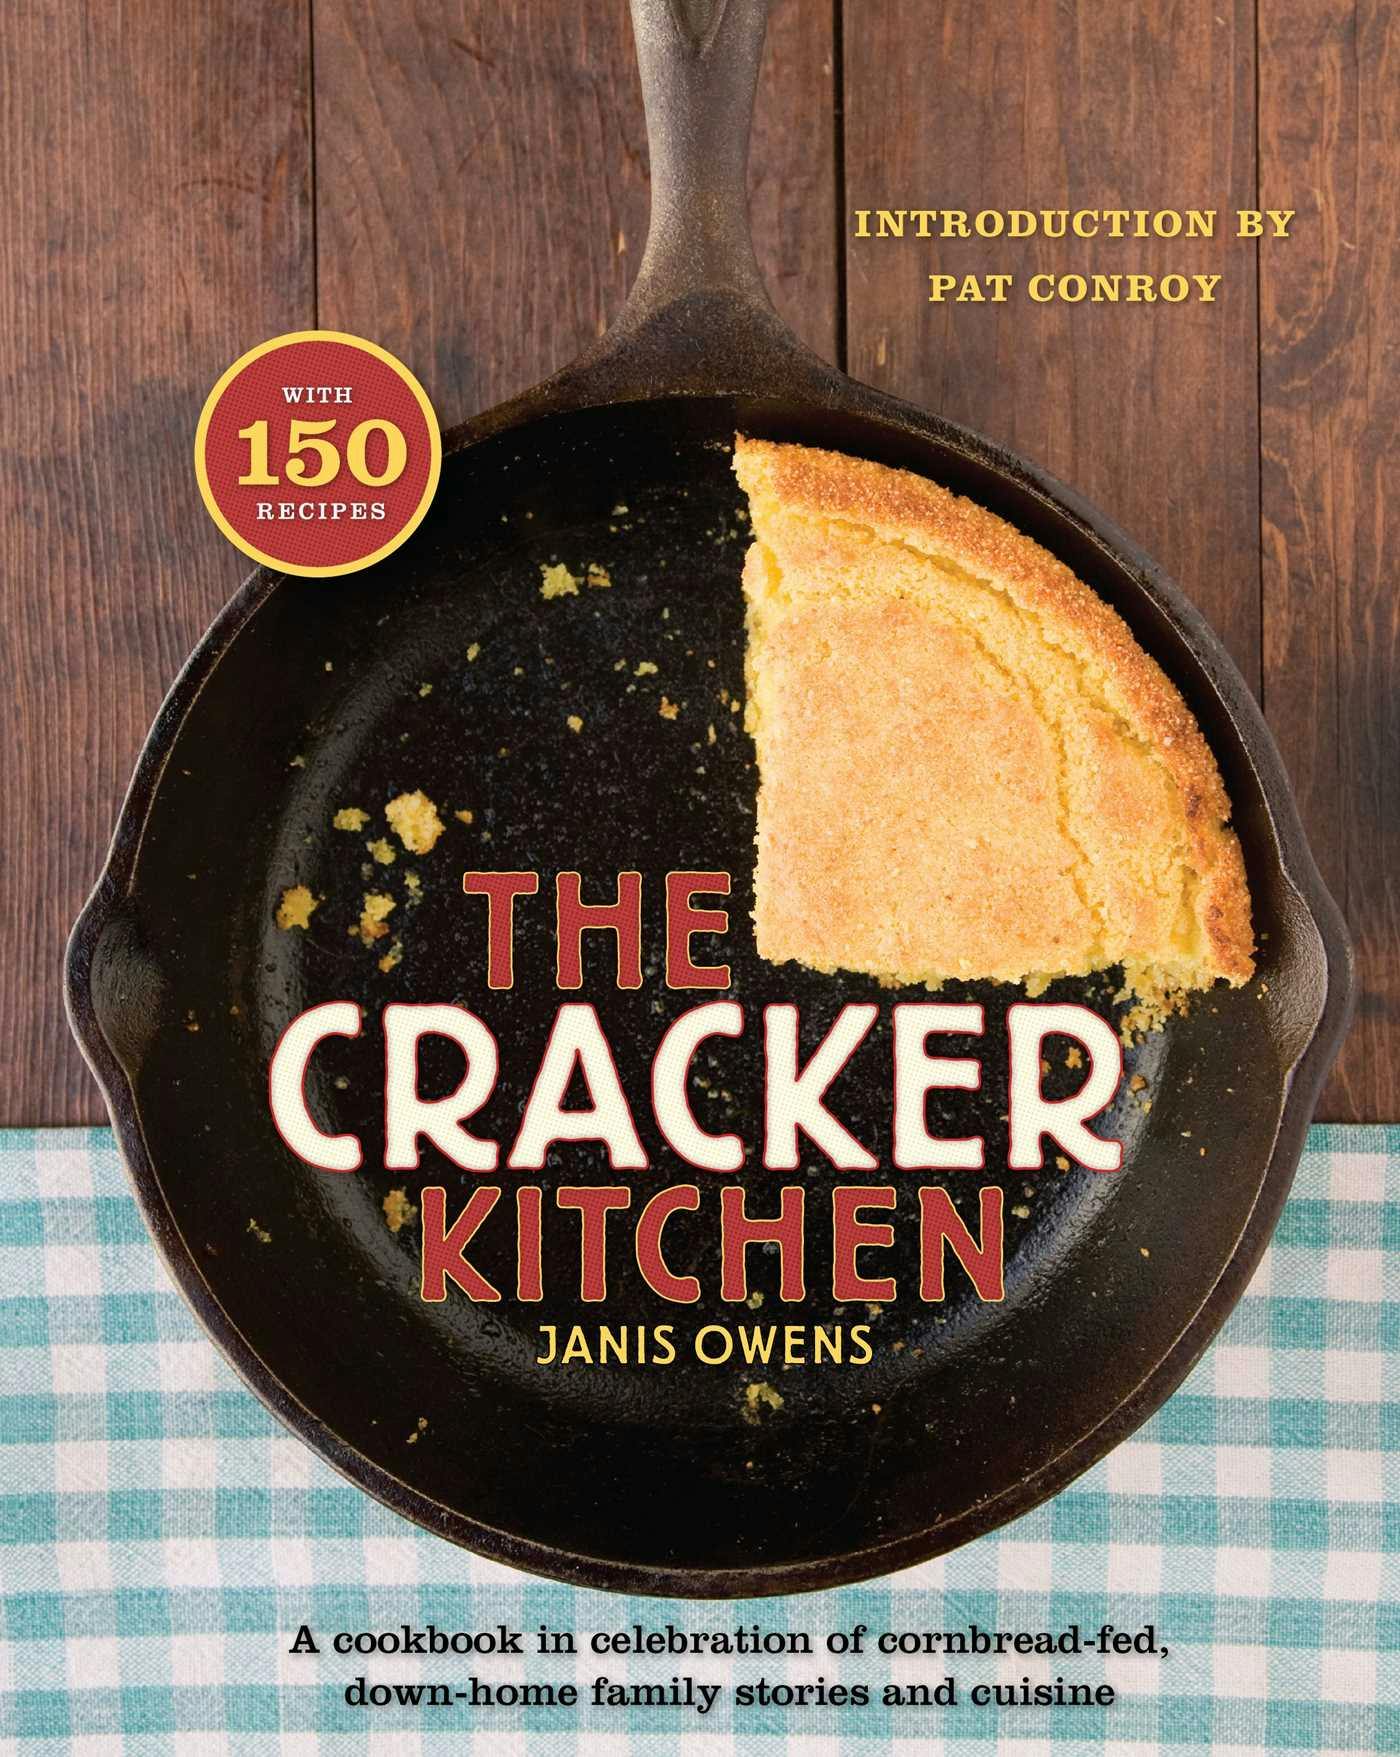 The Cracker Kitchen: A Cookbook in Celebration of Cornbread-Fed, Down Home Family Stories and Cuisine - undefined